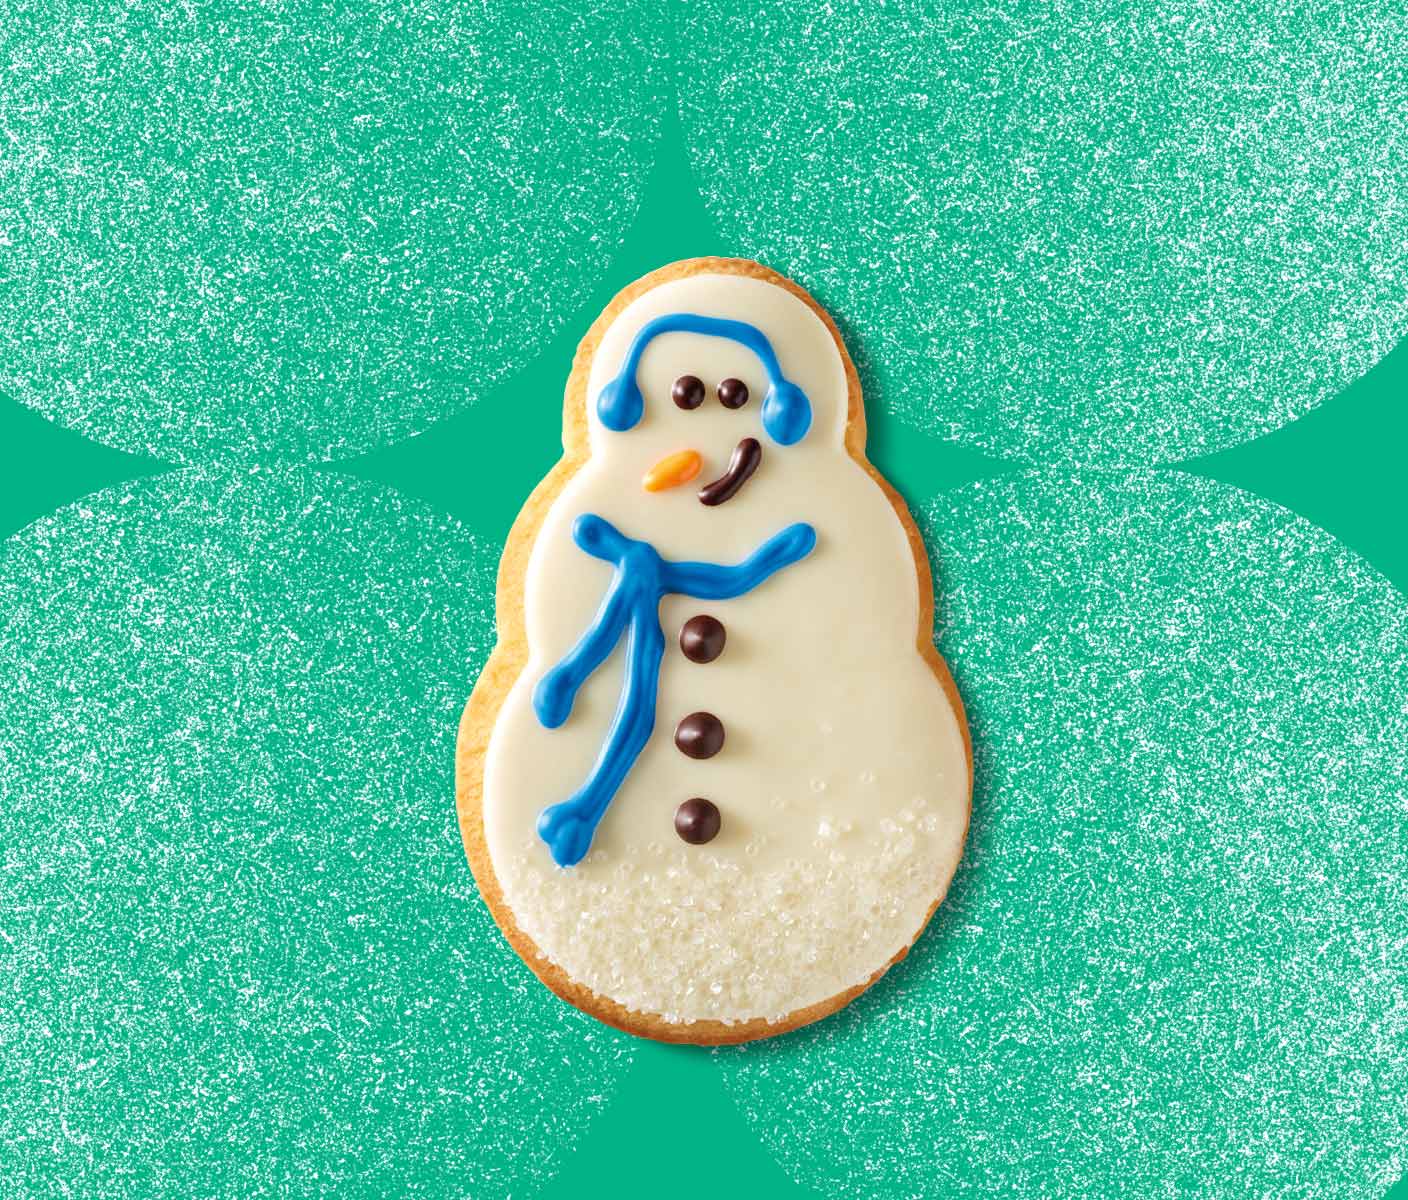 Snowman-shaped cookie covered in white icing and decorated to look like a snowman.